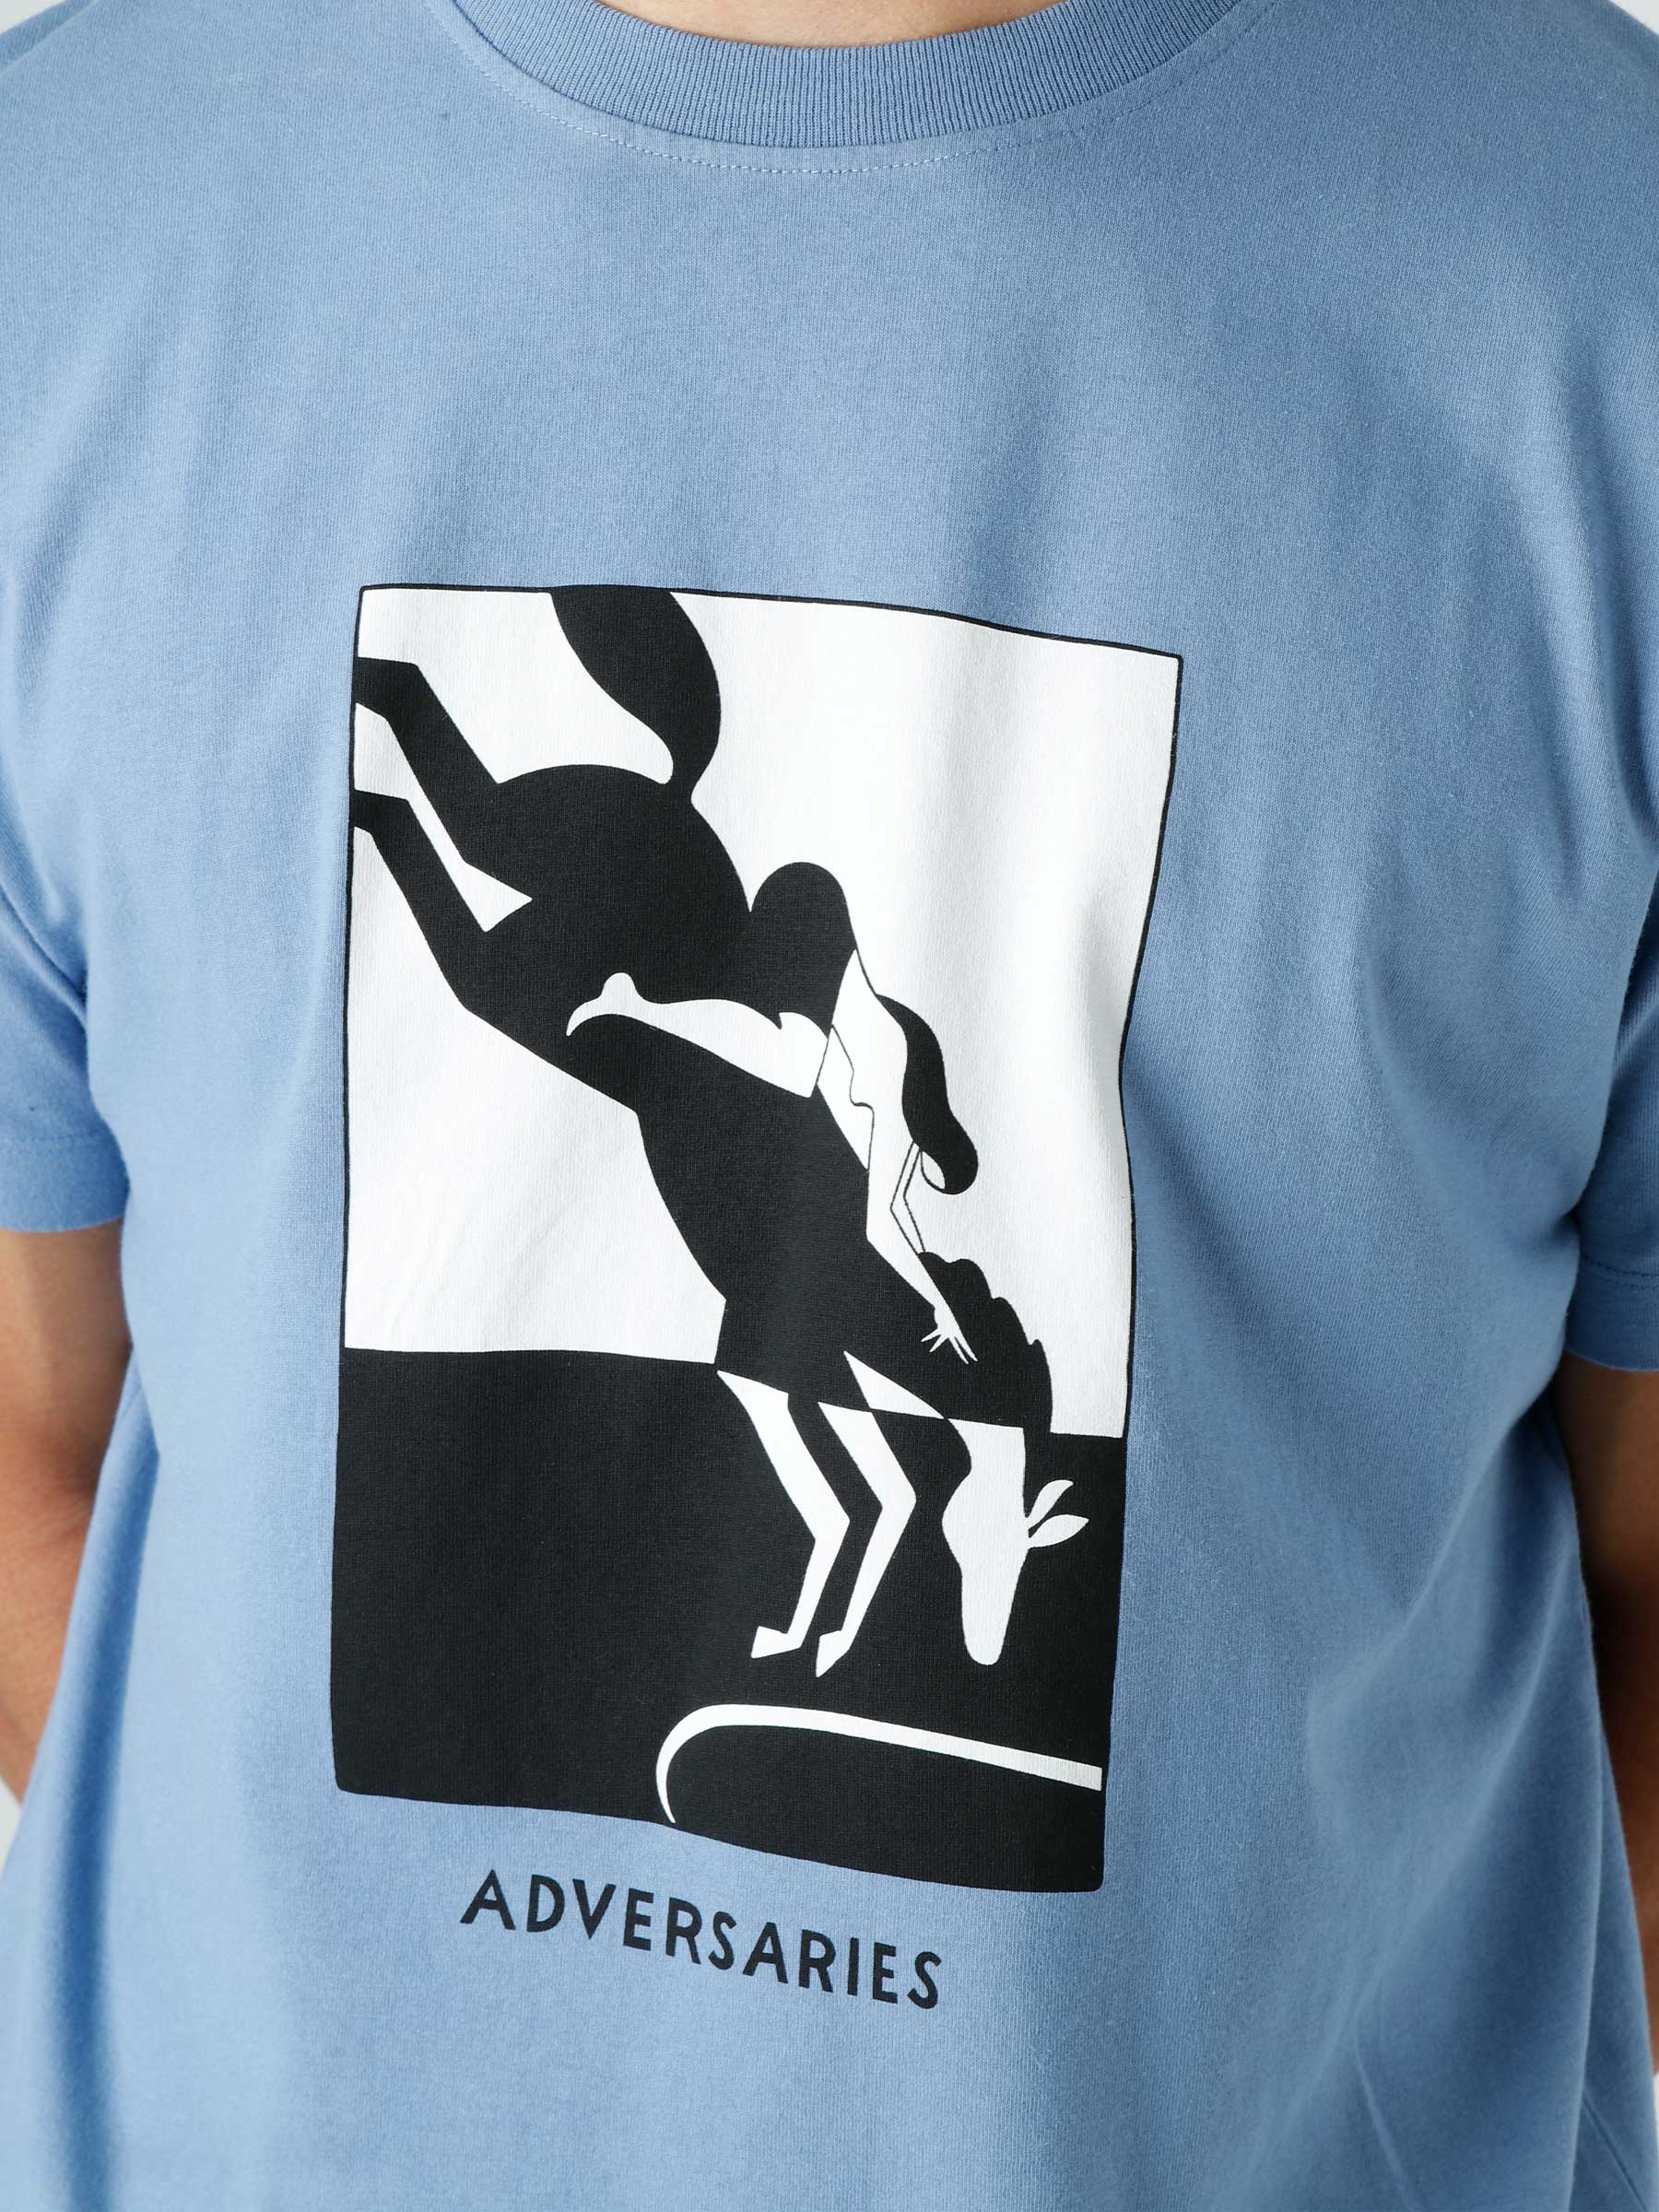 By Parra Duo Toned Adversaries T-shirt